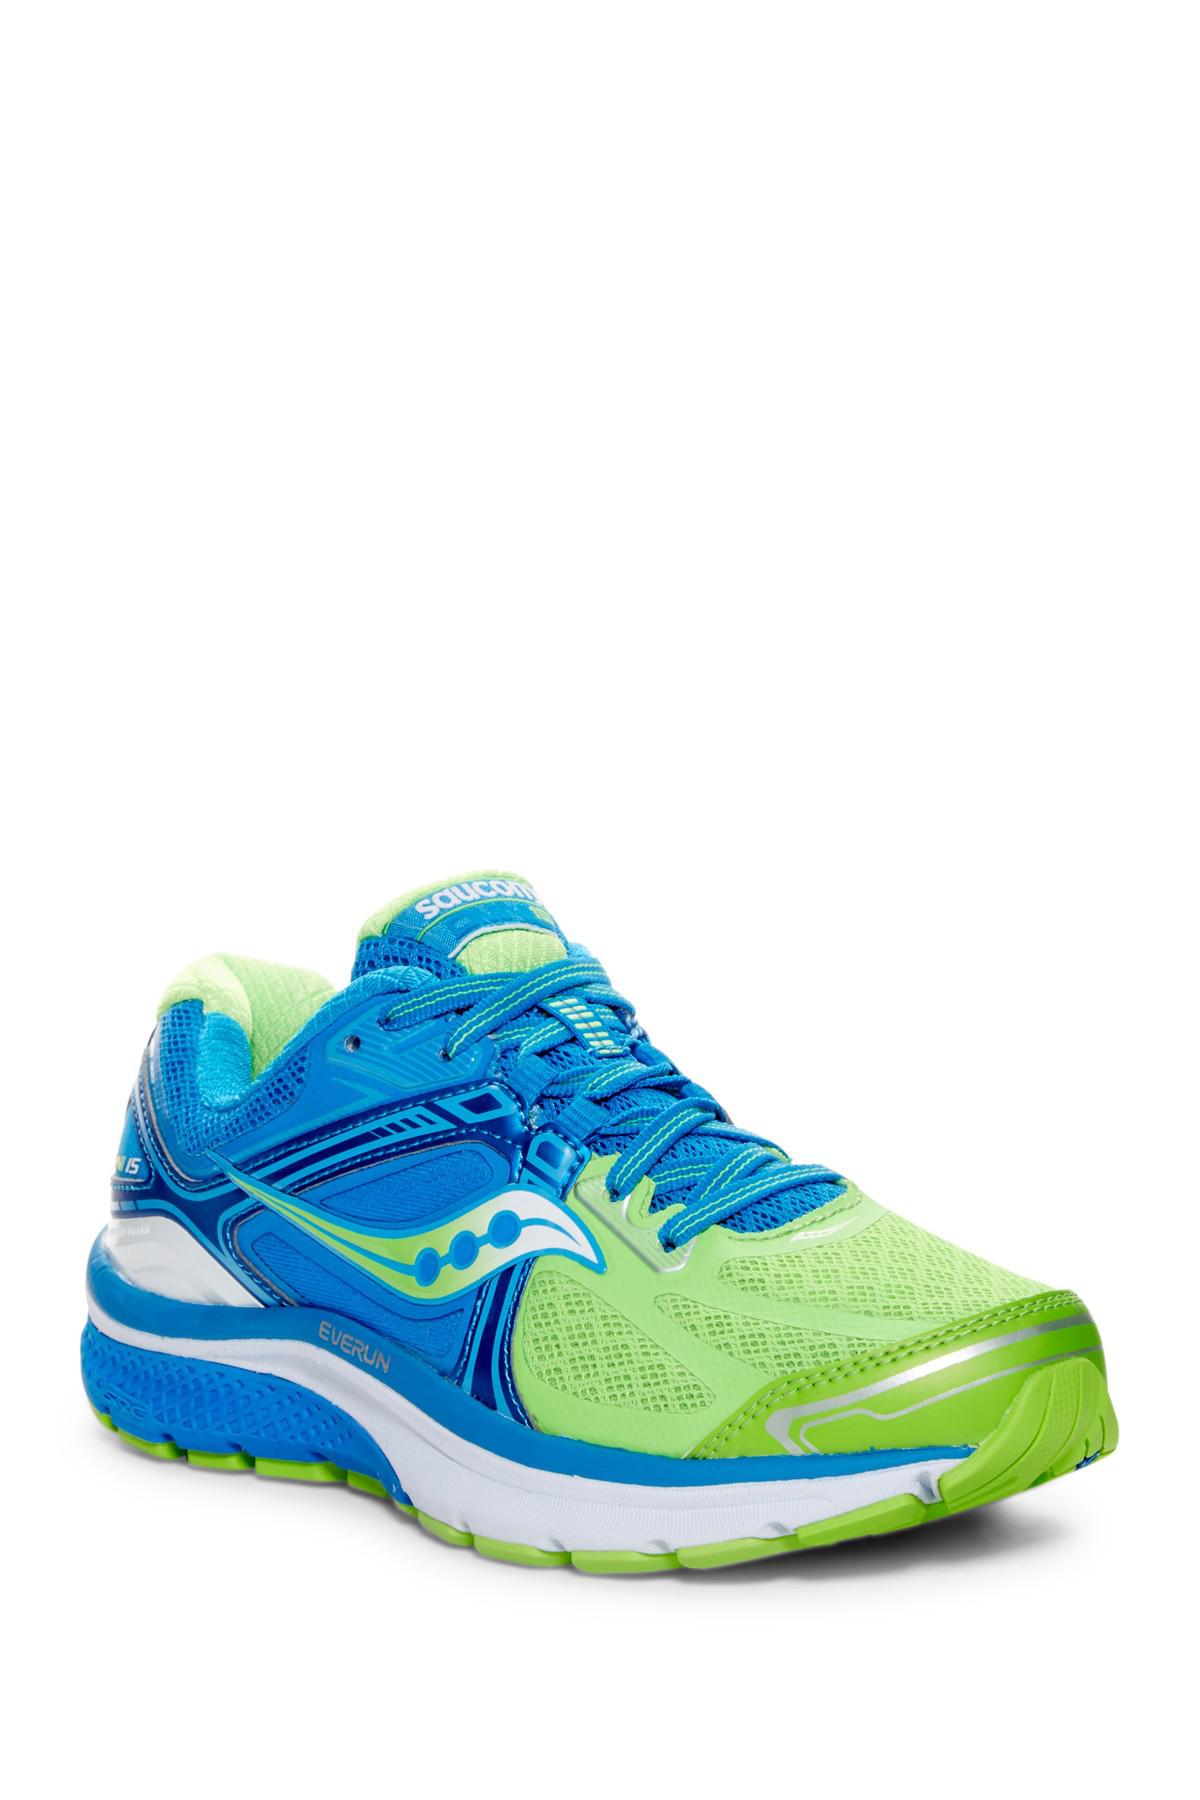 saucony narrow running shoes